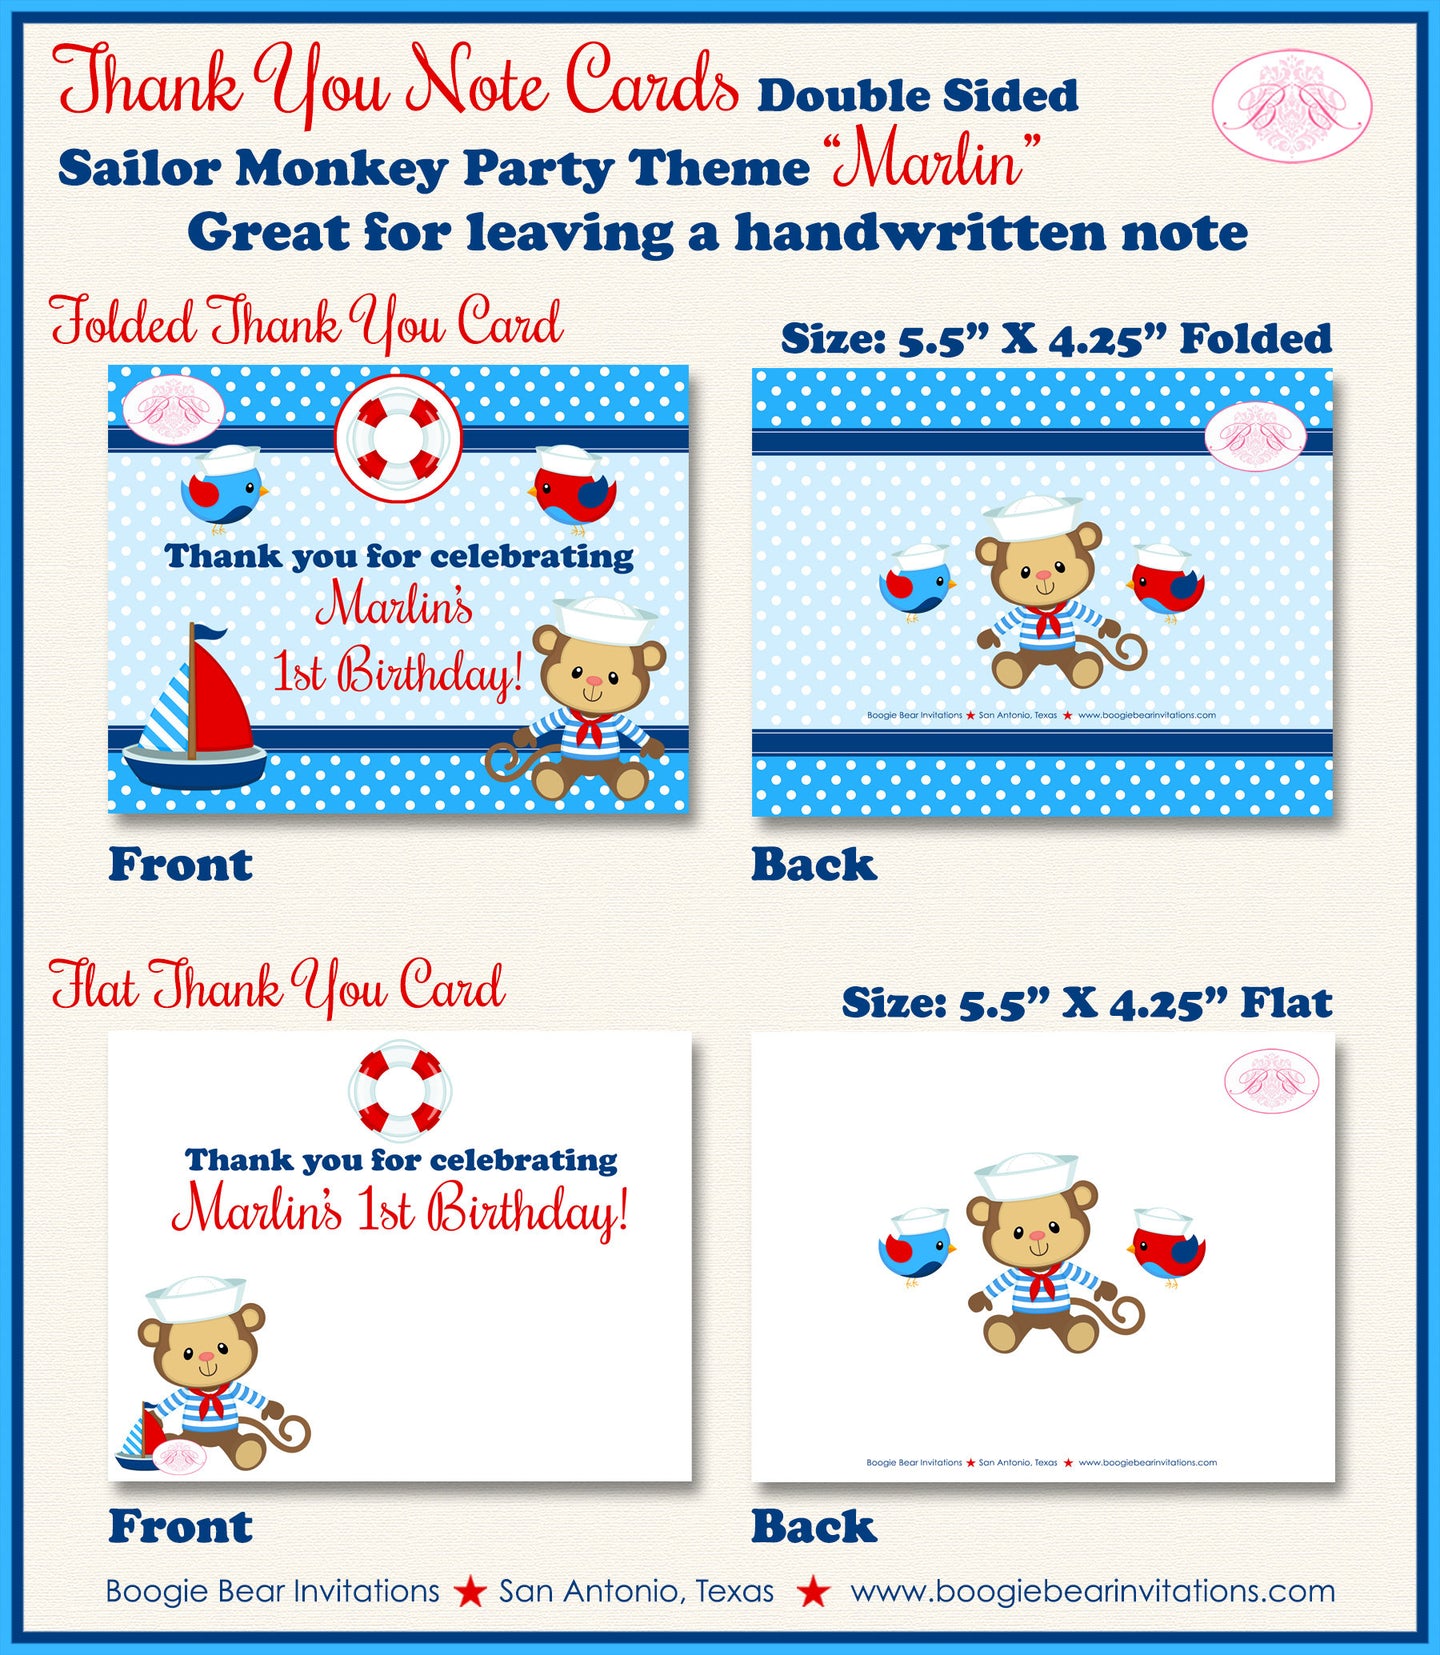 Sailor Monkey Boy Party Thank You Cards Birthday Nautical Boat Red Blue Sail Ocean Swimming Kid Boogie Bear Invitations Marlin Theme Printed